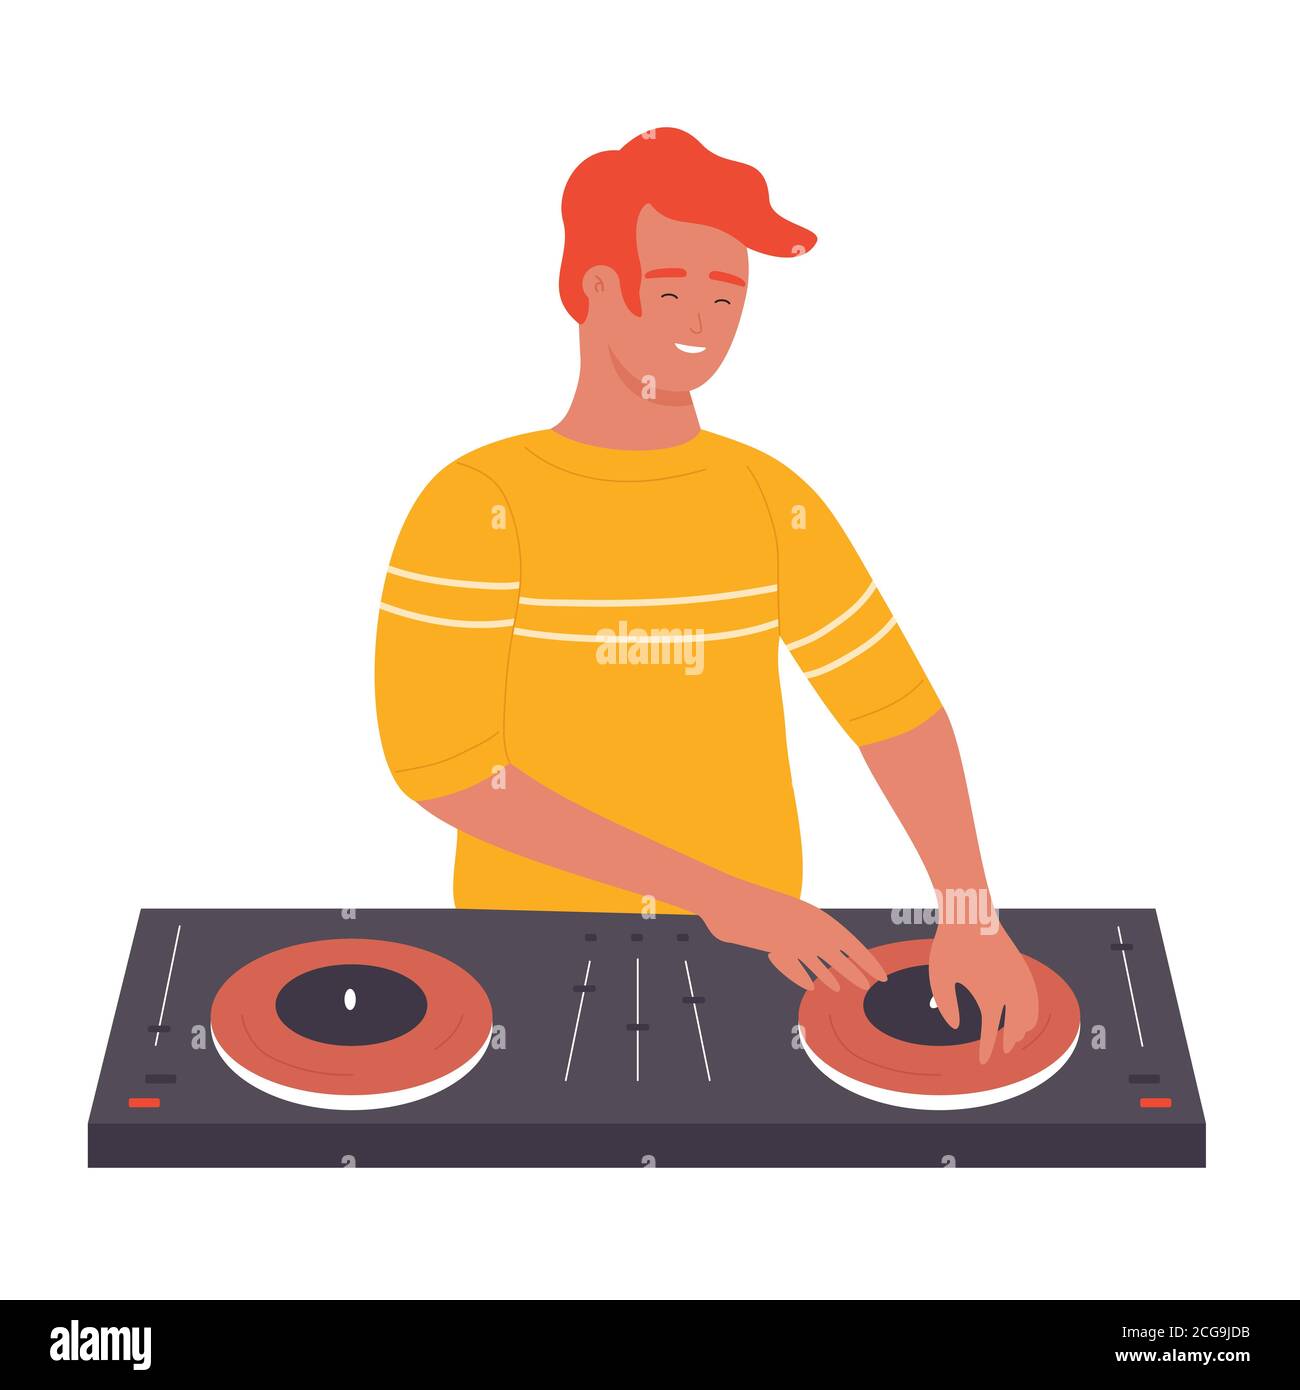 DJ young stylish man on musical party vector illustration. Cartoon flat male DJ character with turntable mixer making contemporary music in night club, spinning disc isolated on white background. Stock Vector